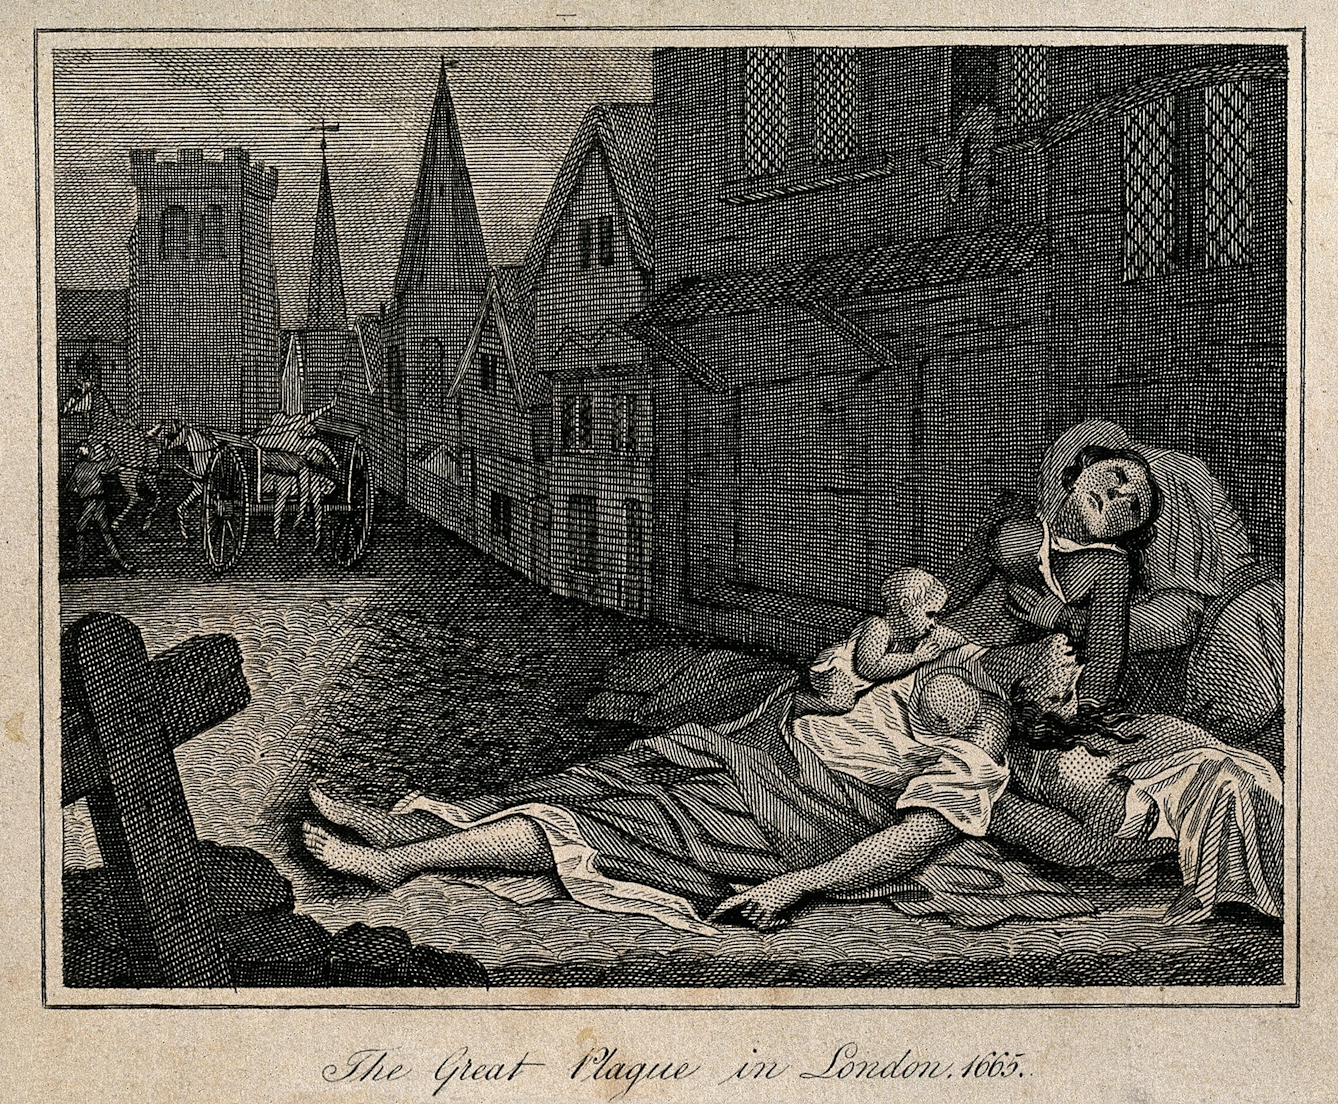 Two dead women lying in a London street during the 1665 plague